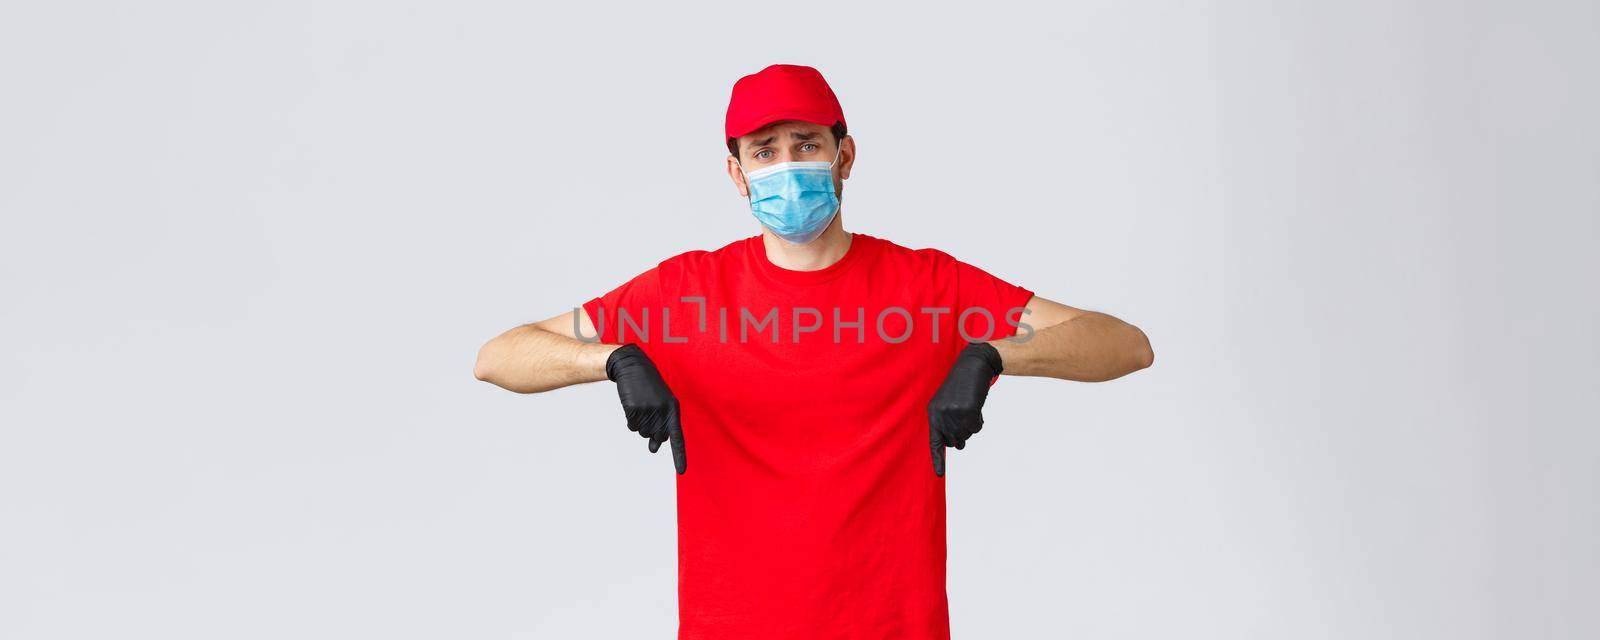 Covid-19, self-quarantine, online shopping and shipping concept. Upset and gloomy, sad delivery guy in red cap, t-shirt uniform, pointing fingers down disappointed. Courier showing bad news.